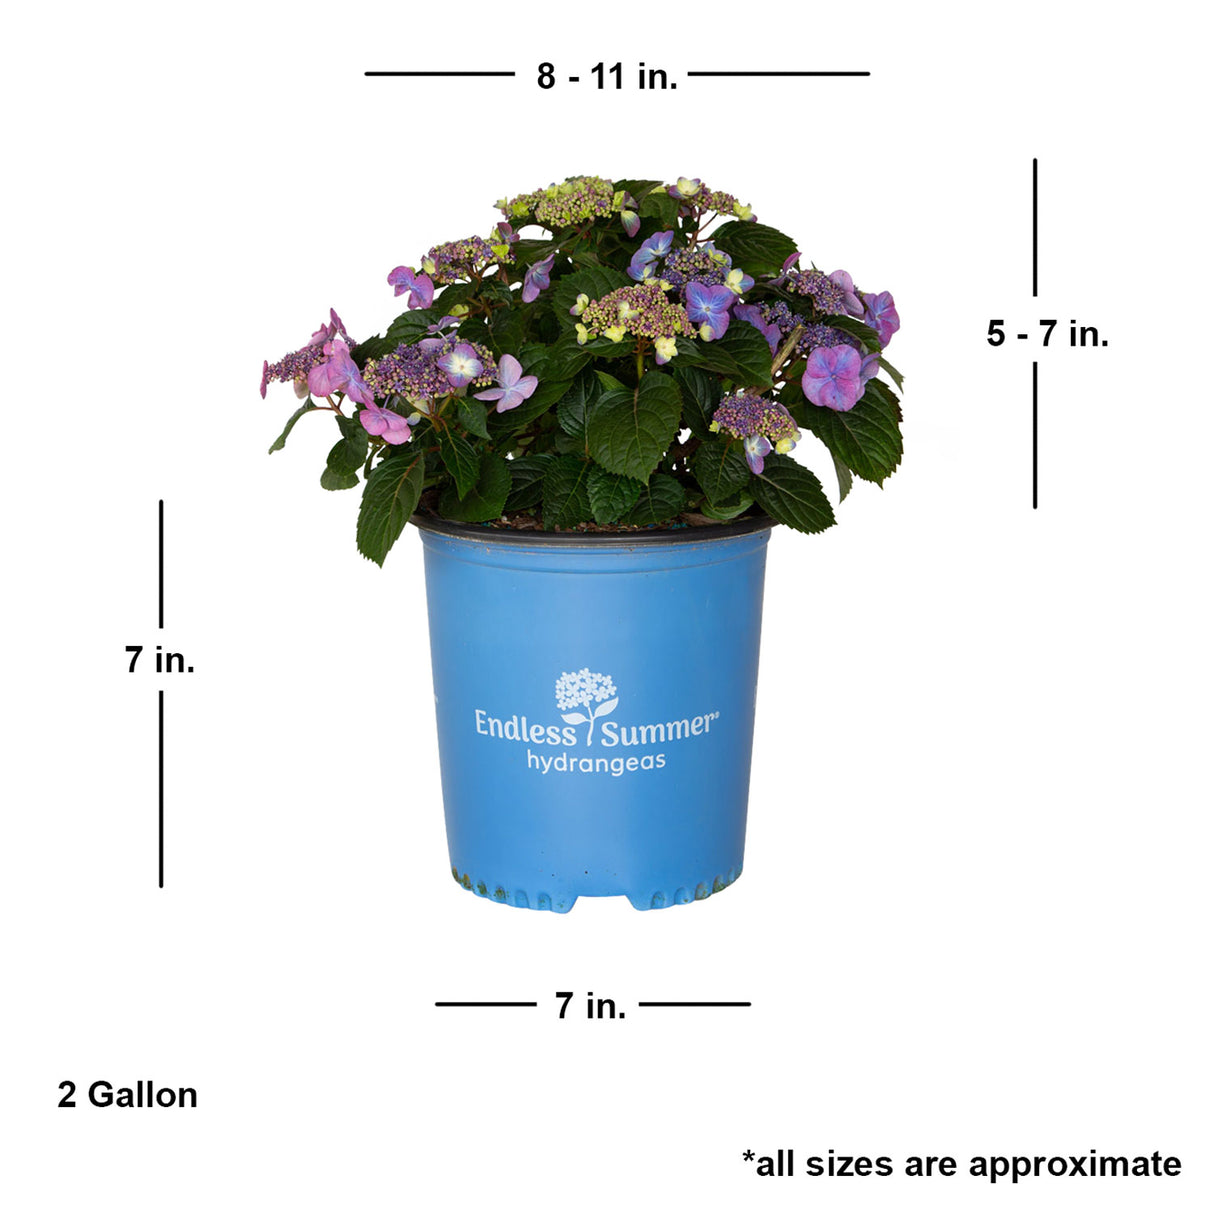 2 Gallon Pop Star Hydrangea with shipped plant dimensions. Ships at approx 5-7 inches tall and 8-11 inches wide